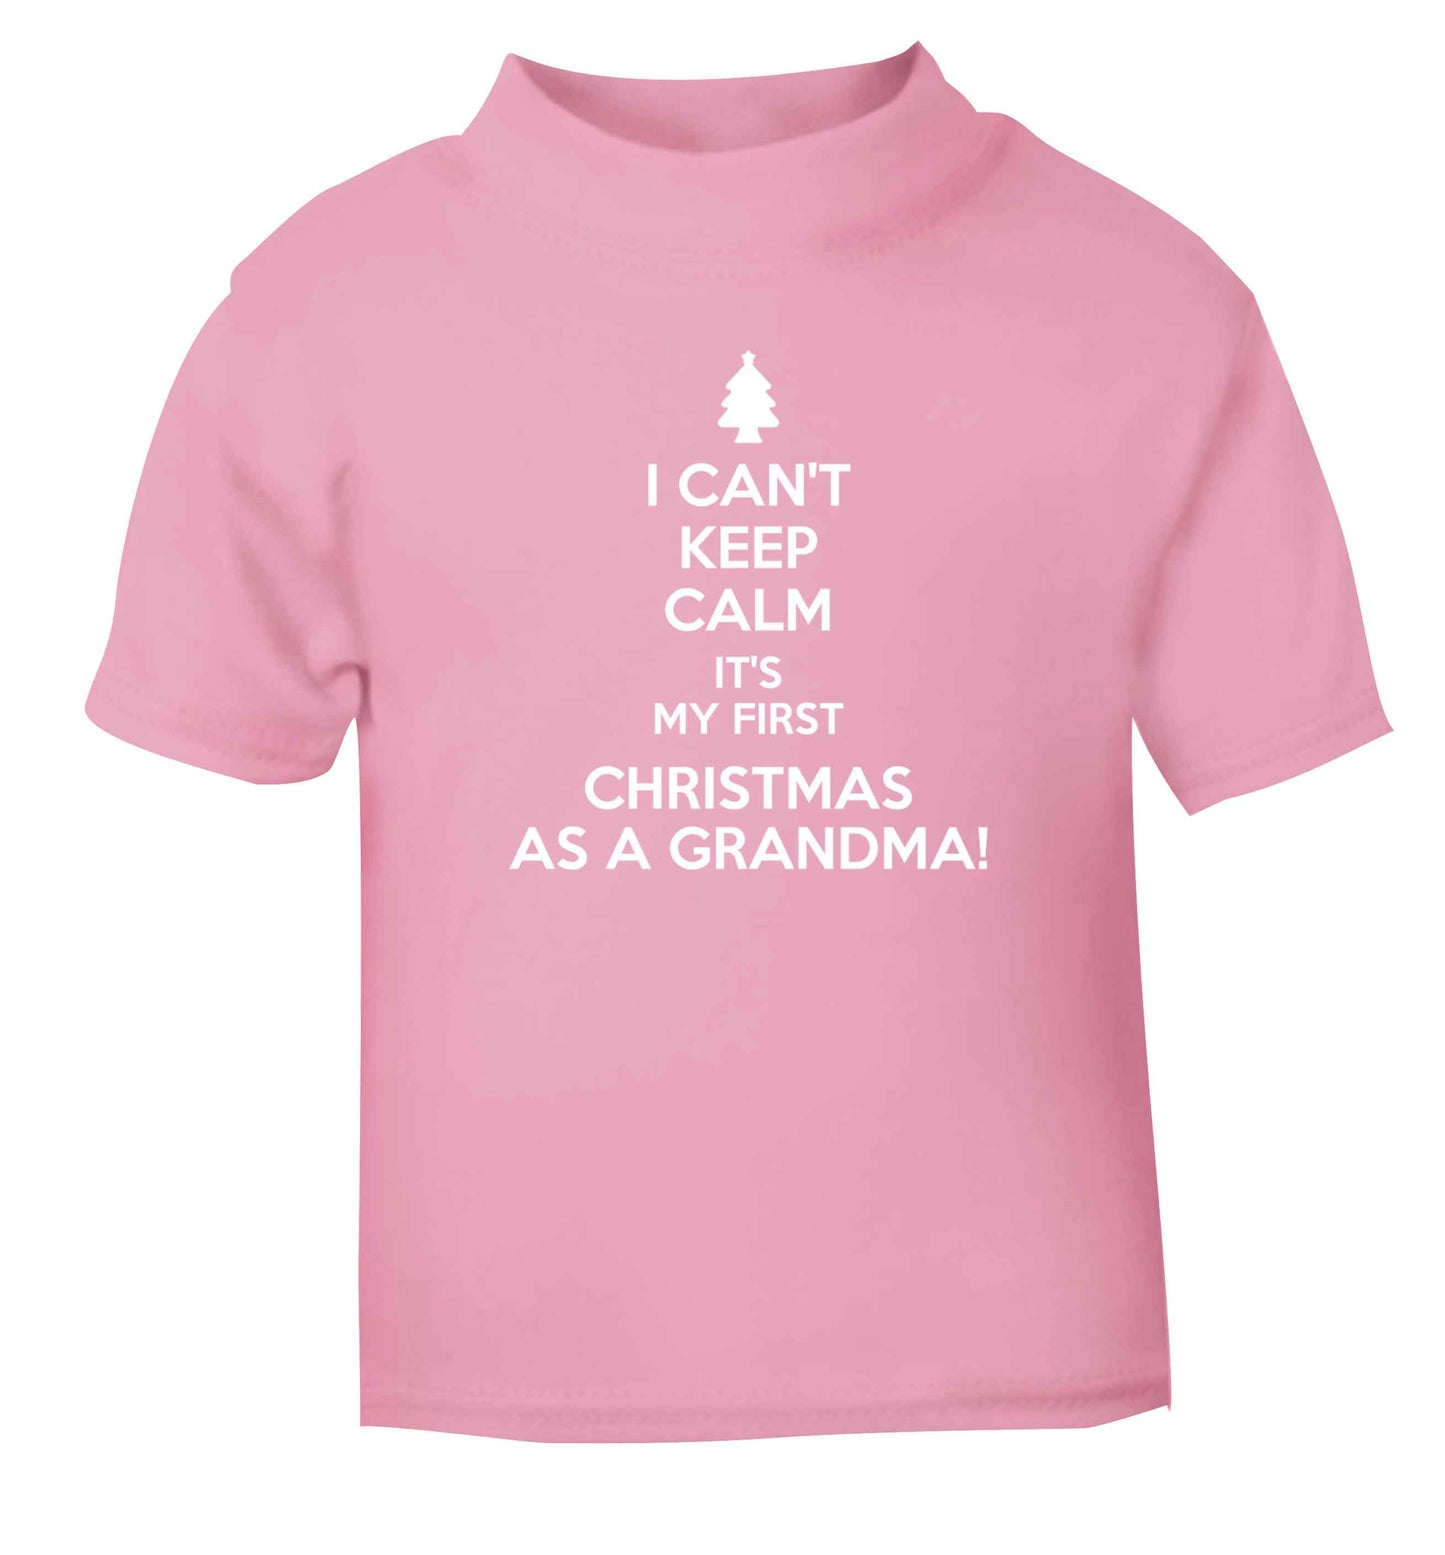 I can't keep calm it's my first Christmas as a grandma! light pink Baby Toddler Tshirt 2 Years